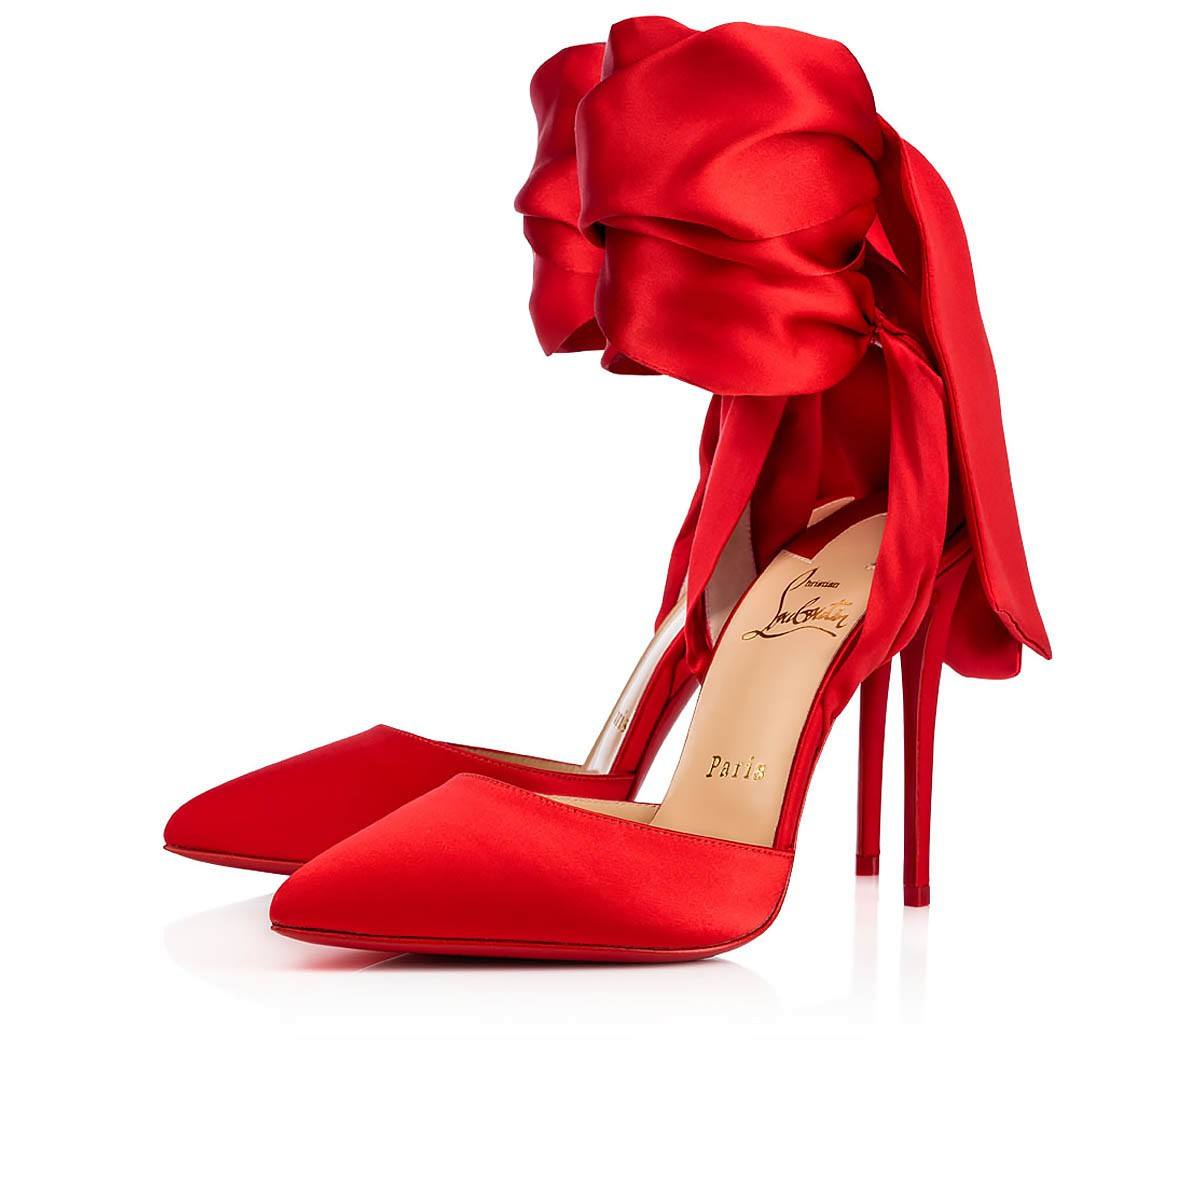 10 Best Red Heels To Buy In 2023 (Reviews, Prices & Photos)